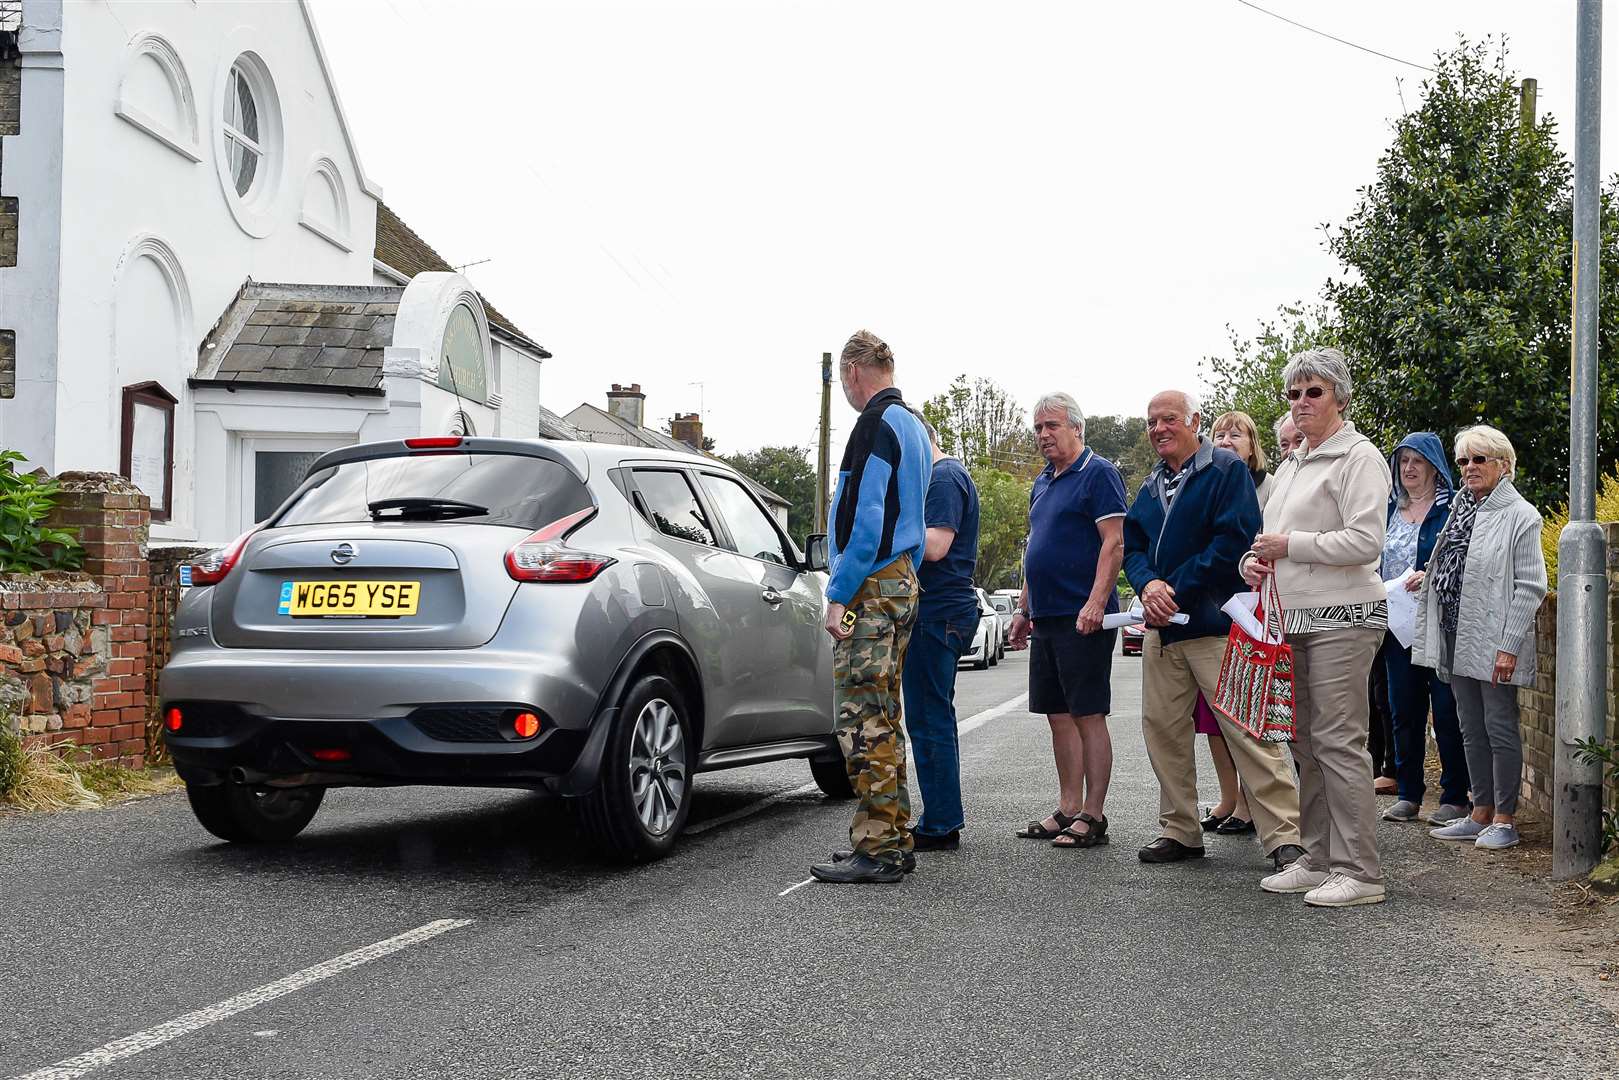 The residents marked the road where a proposed width restriction will be put in. Picture: Alan Langley